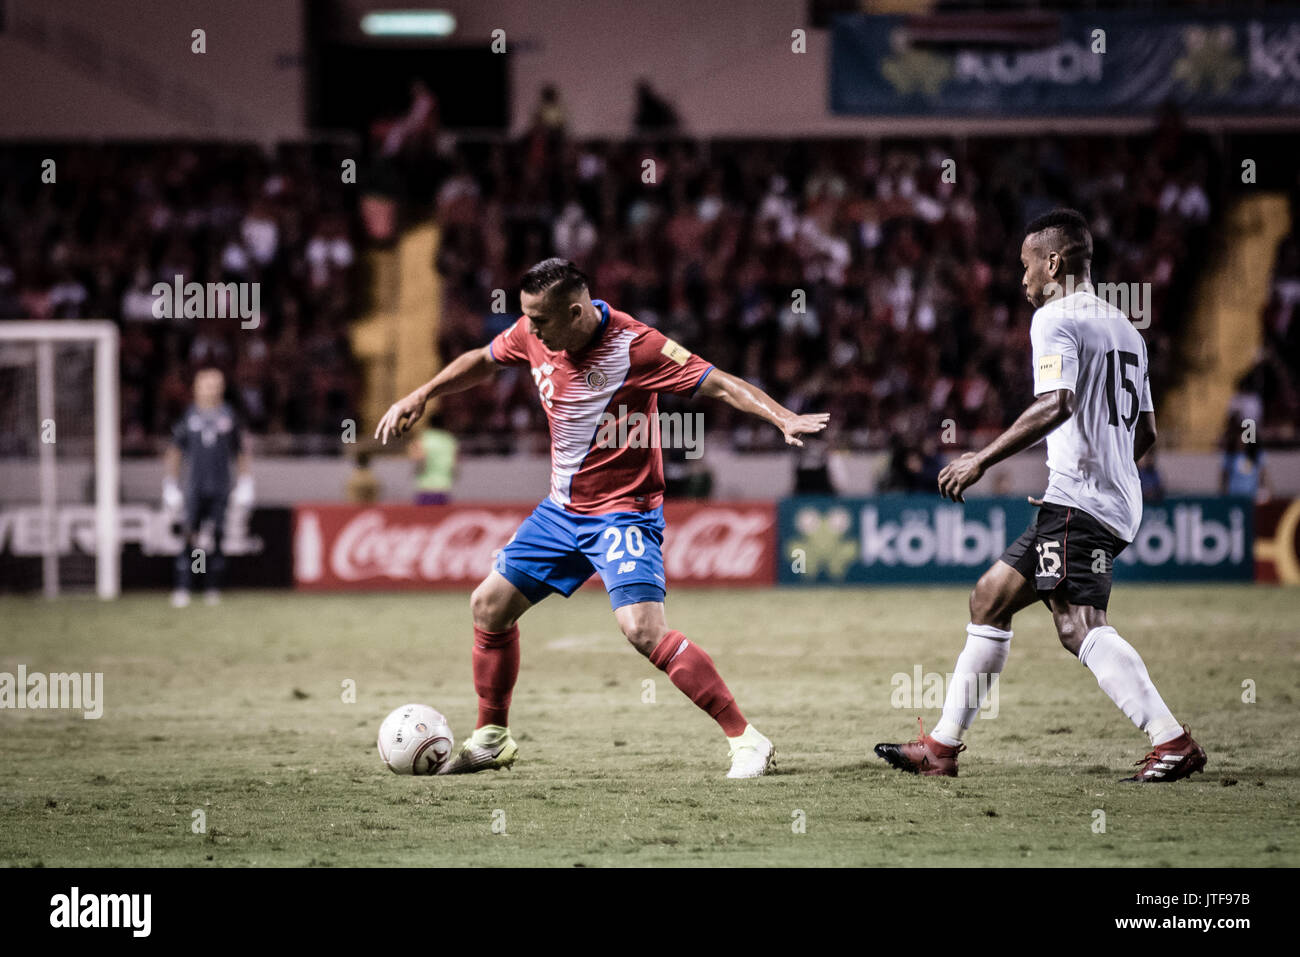 SAN JOSE, COSTA RICA. JUNE 13, 2017 - David Guzman. Costa Rica won 2-1 over Trinidad and Tobago, as Matchday 6 wrapped up in CONCACAF’s final round of Stock Photo